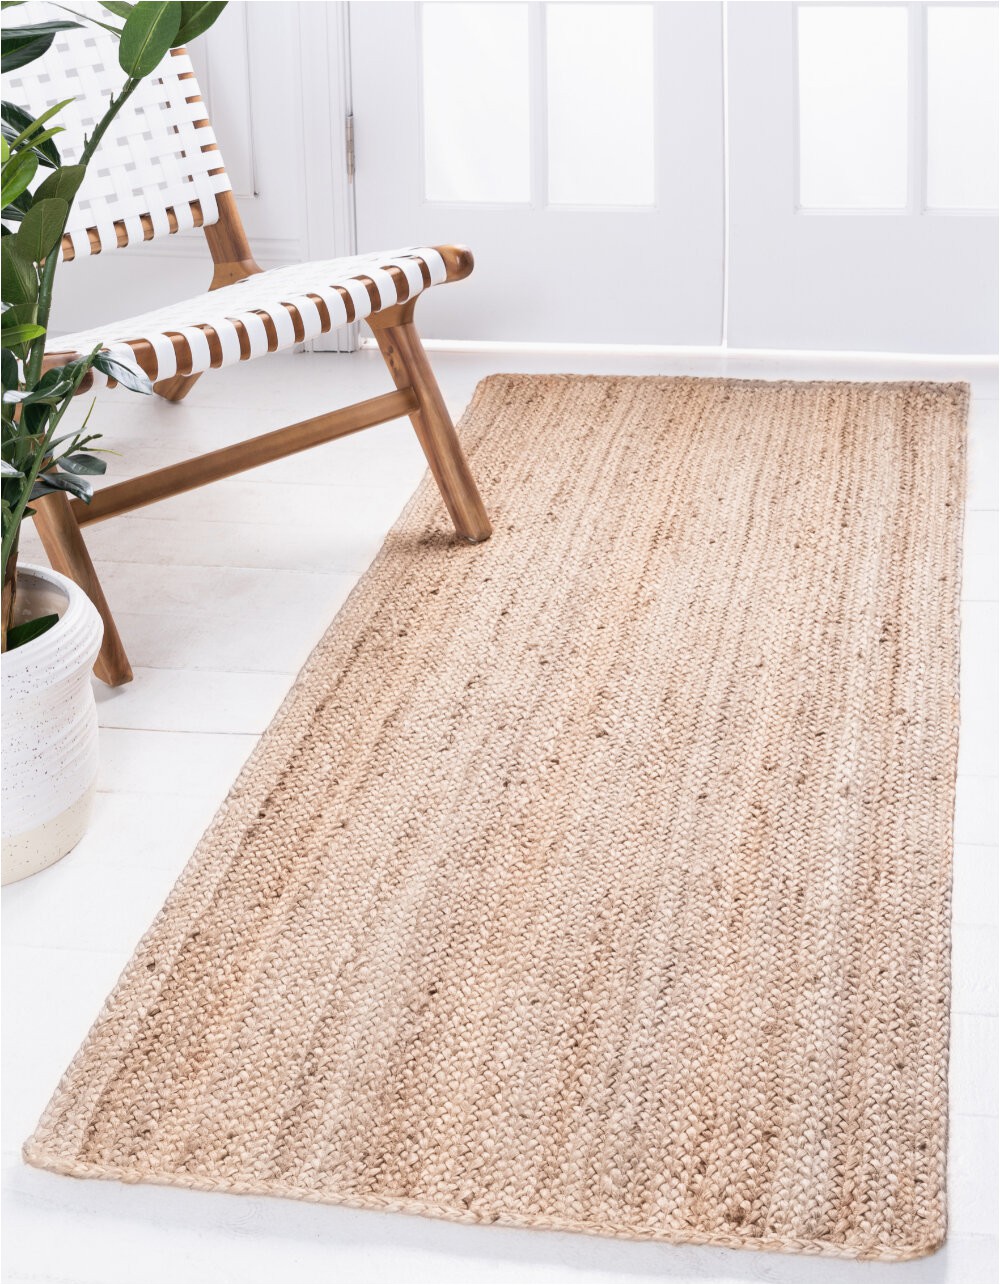 Laurel Foundry Modern Farmhouse area Rugs Meador Hand Knotted Natural area Rug